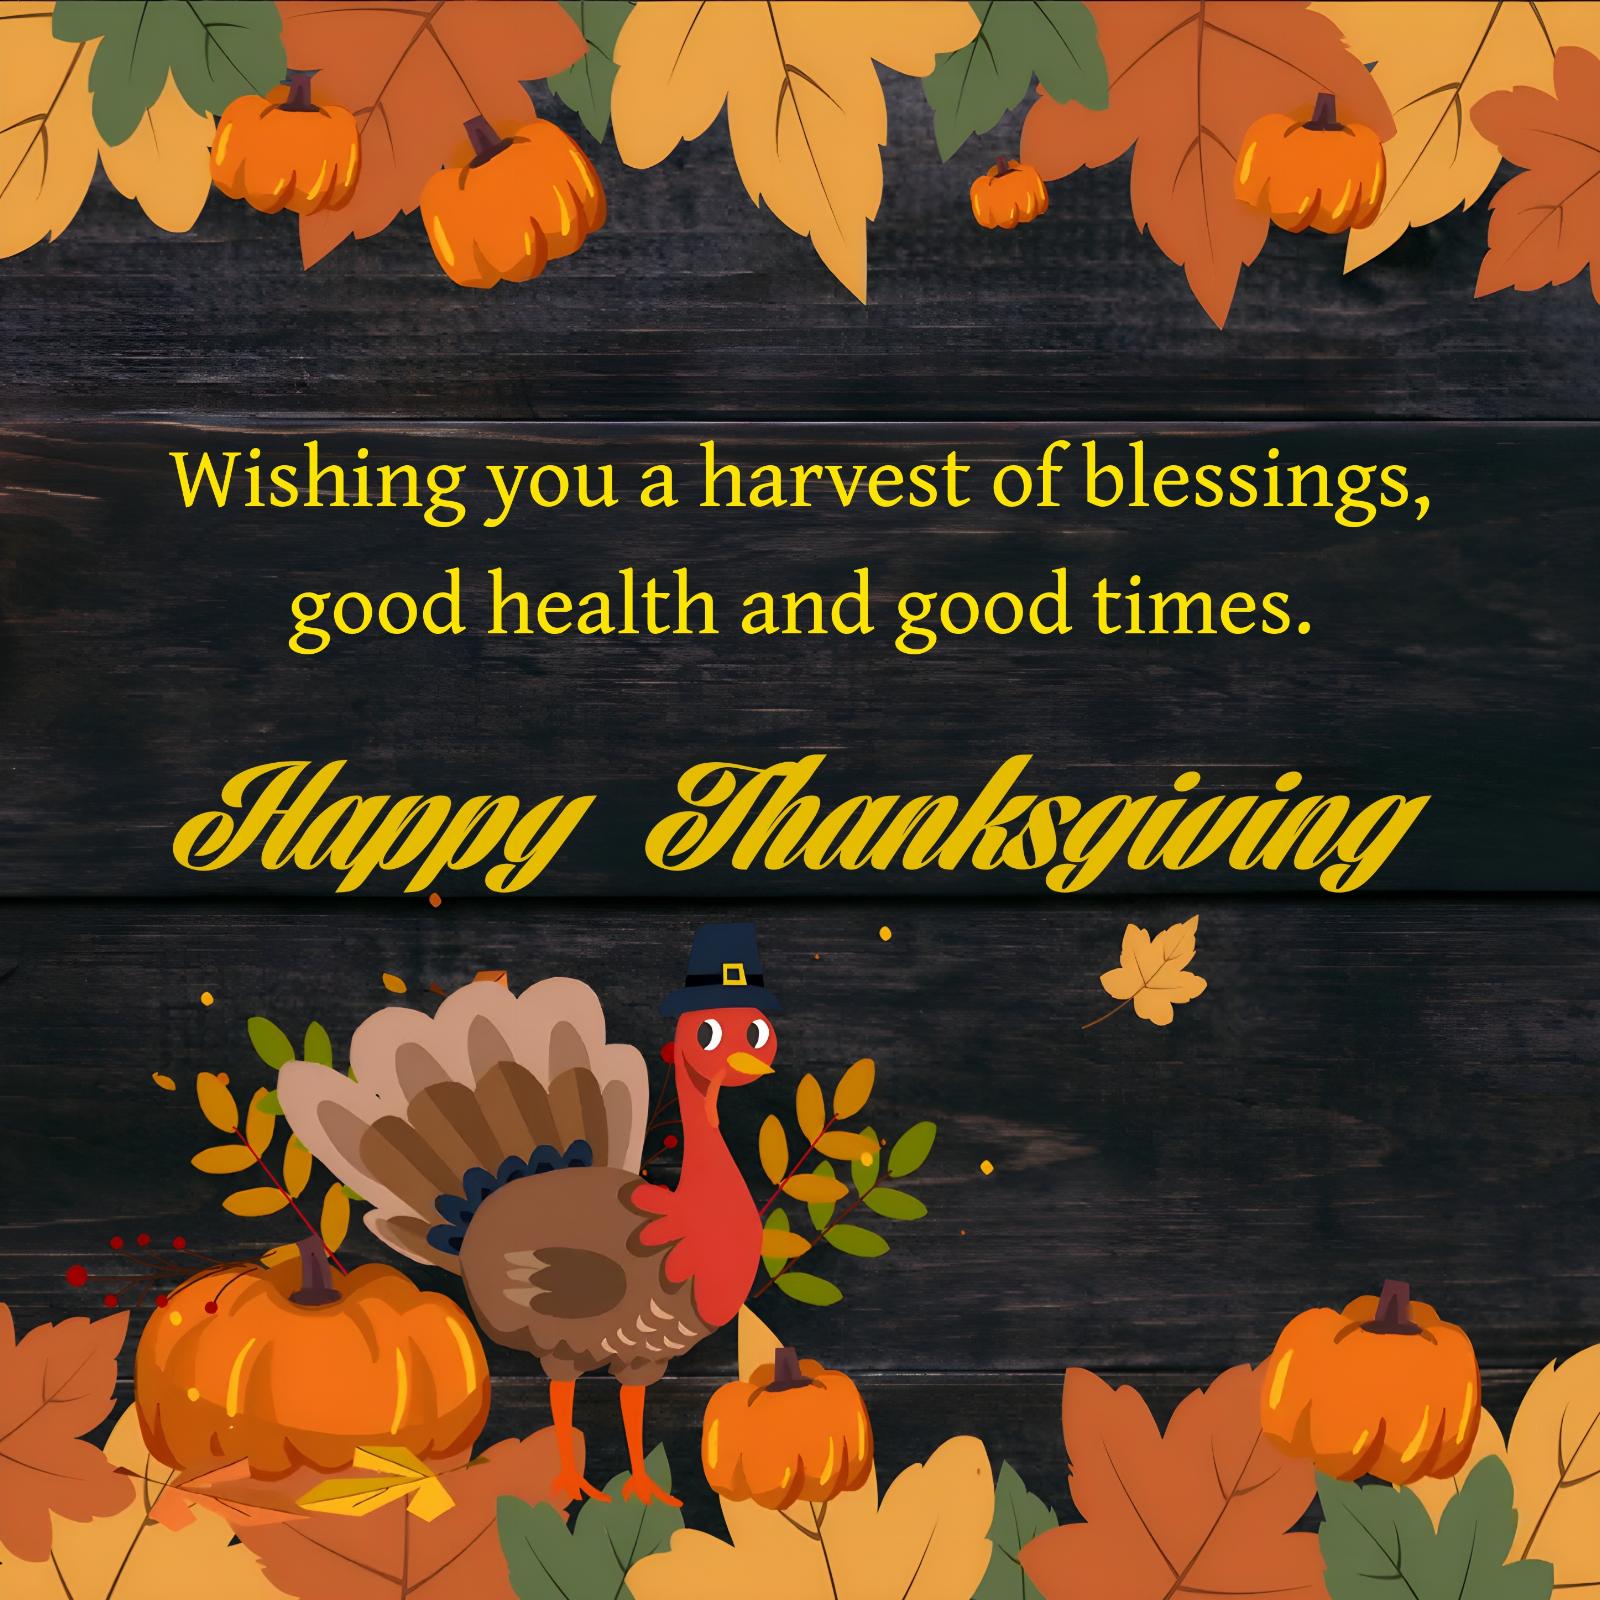 Wishing you a harvest of blessings good health and good times